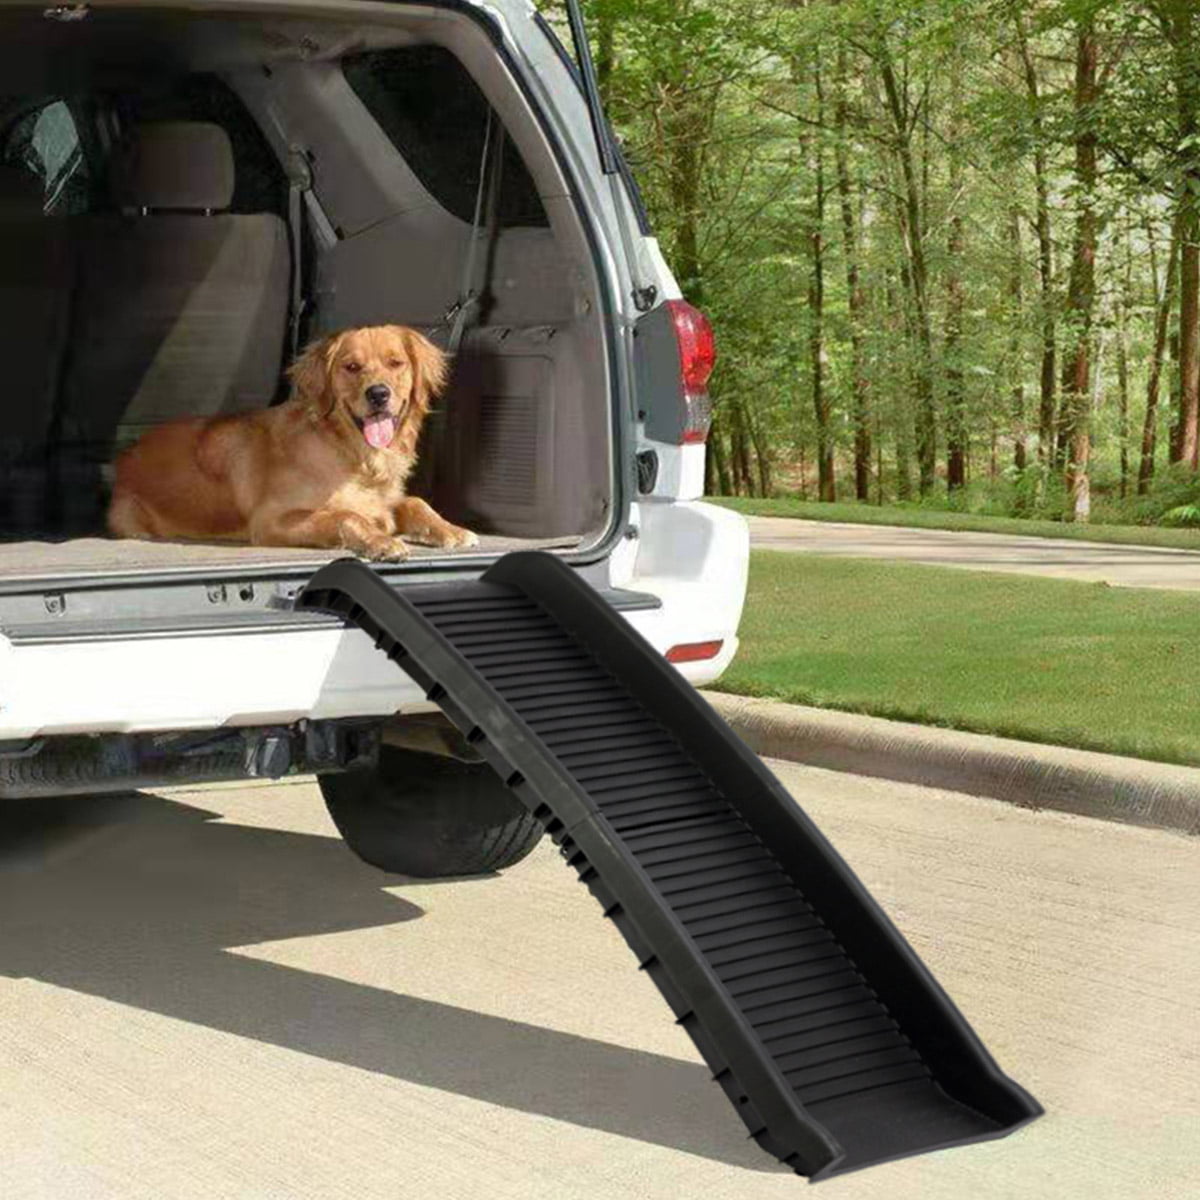 61 Heavy Duty Folding Dog Ramp Pet Ramps for SUV Cars Travel Portable Light Weight